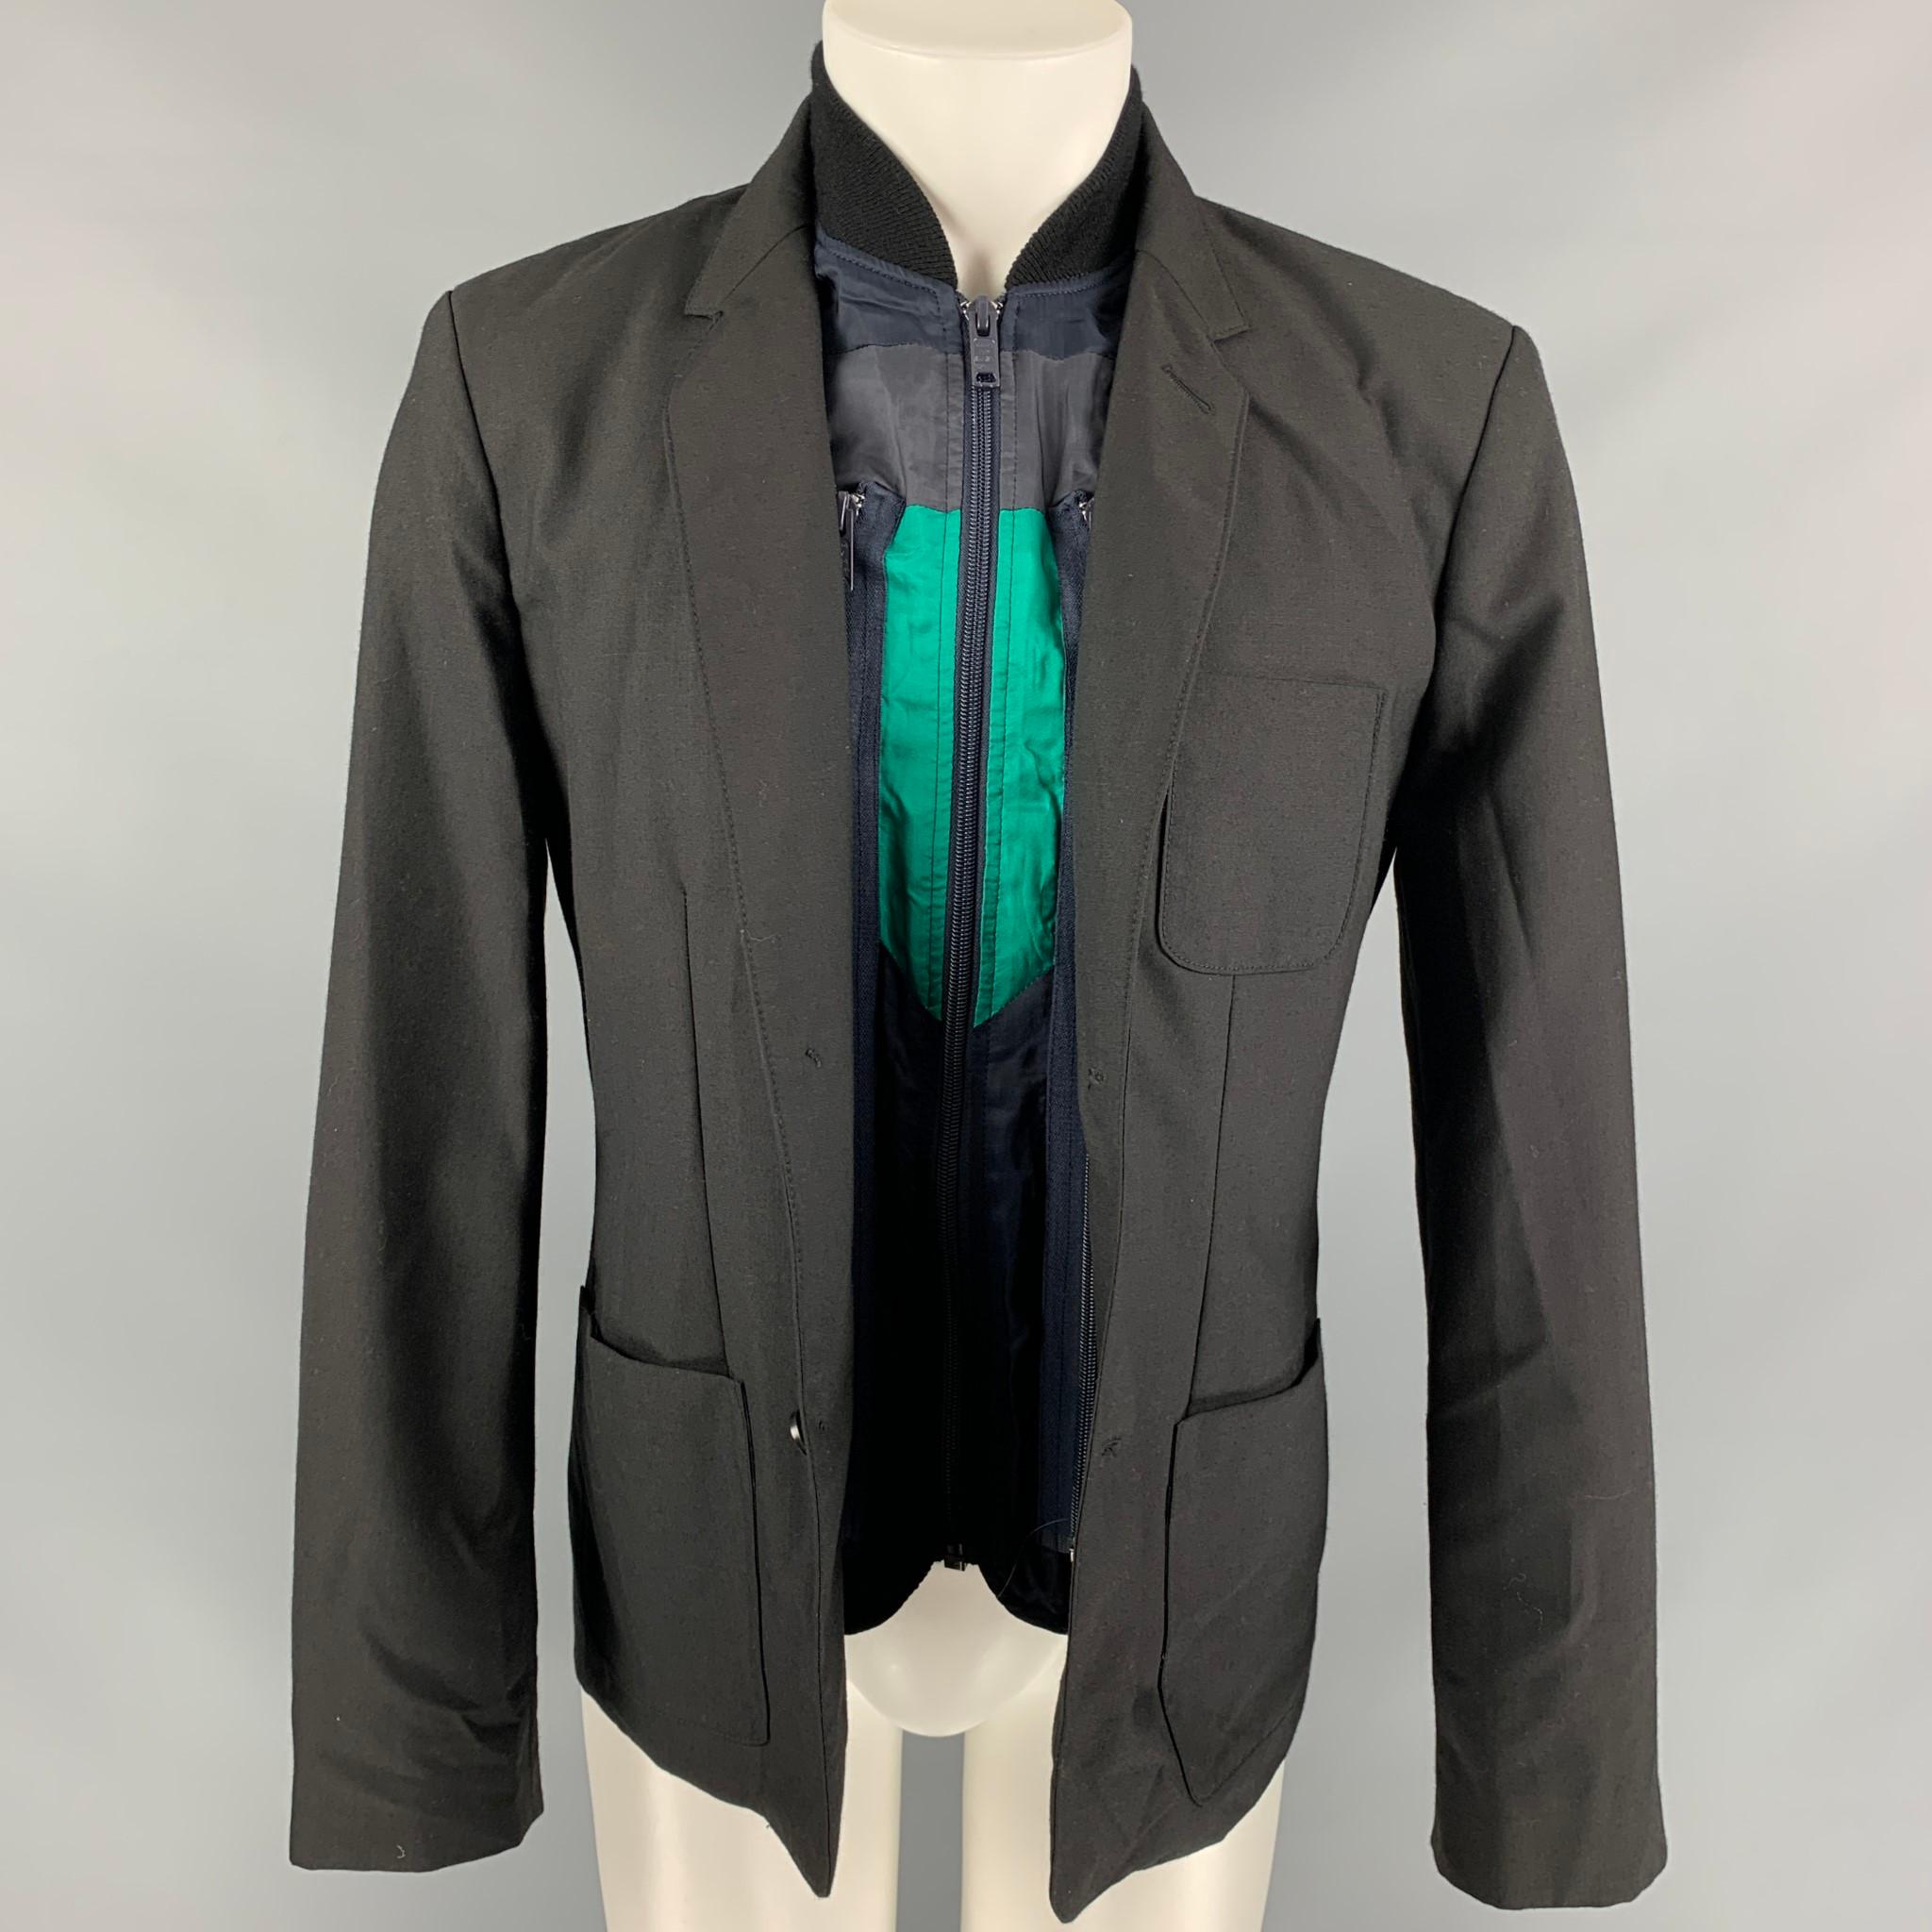 MARC by MARC JACOBS jacket comes in a black & navy polyester blend featuring a removable vest design, patch pockets, notch lapel, and a three button closure. 

Very Good Pre-Owned Condition.
Marked: L

Measurements:

Shoulder: 18 in.
Chest: 41